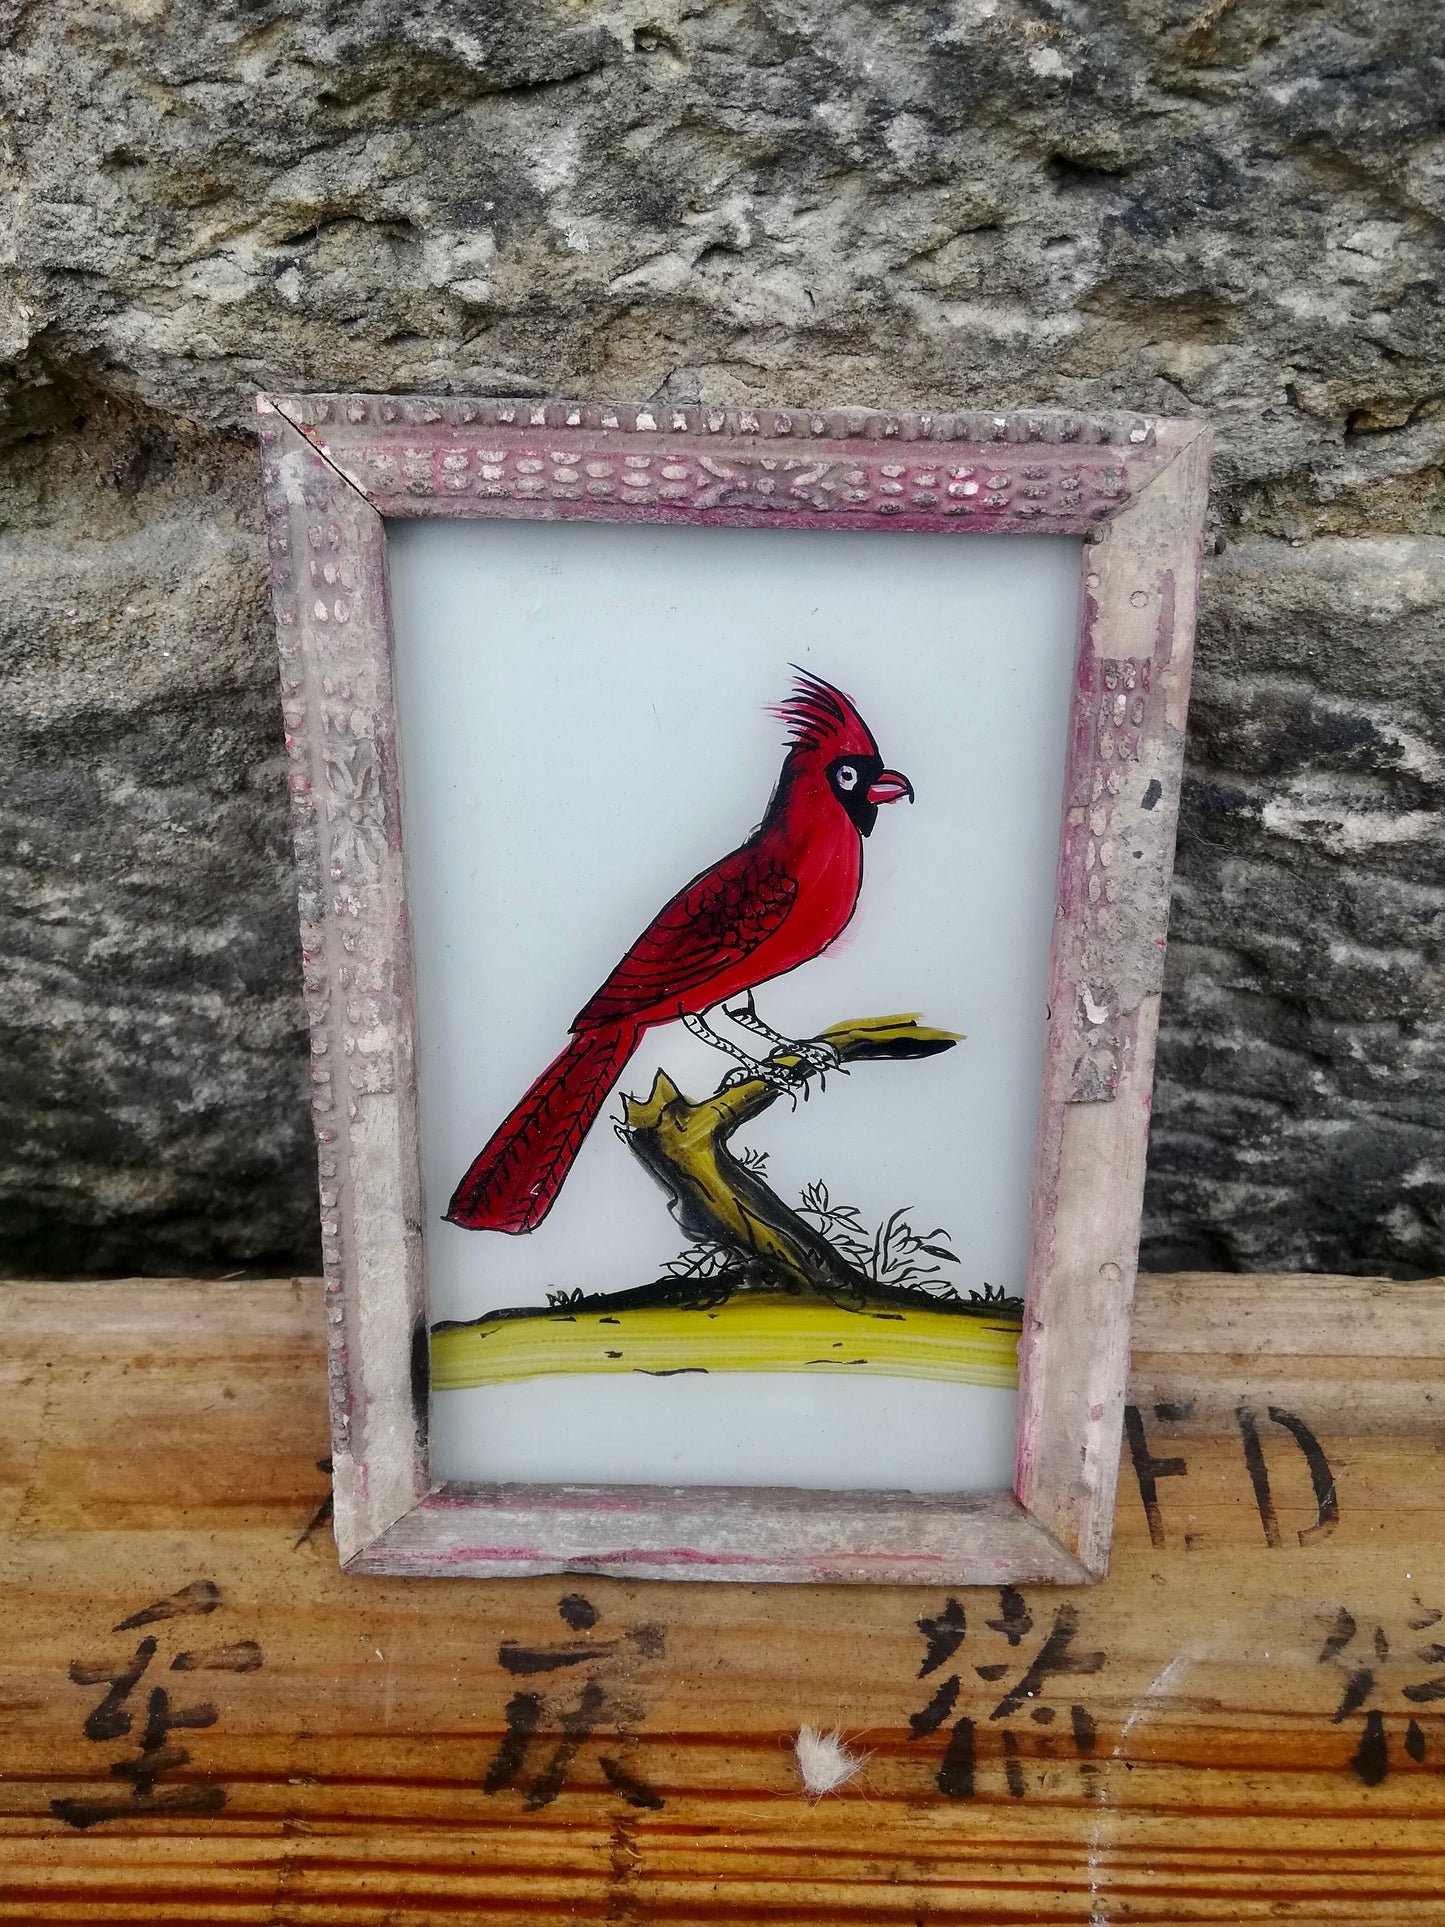 Vintage glass painting of a red cardinal in a beautiful original frame